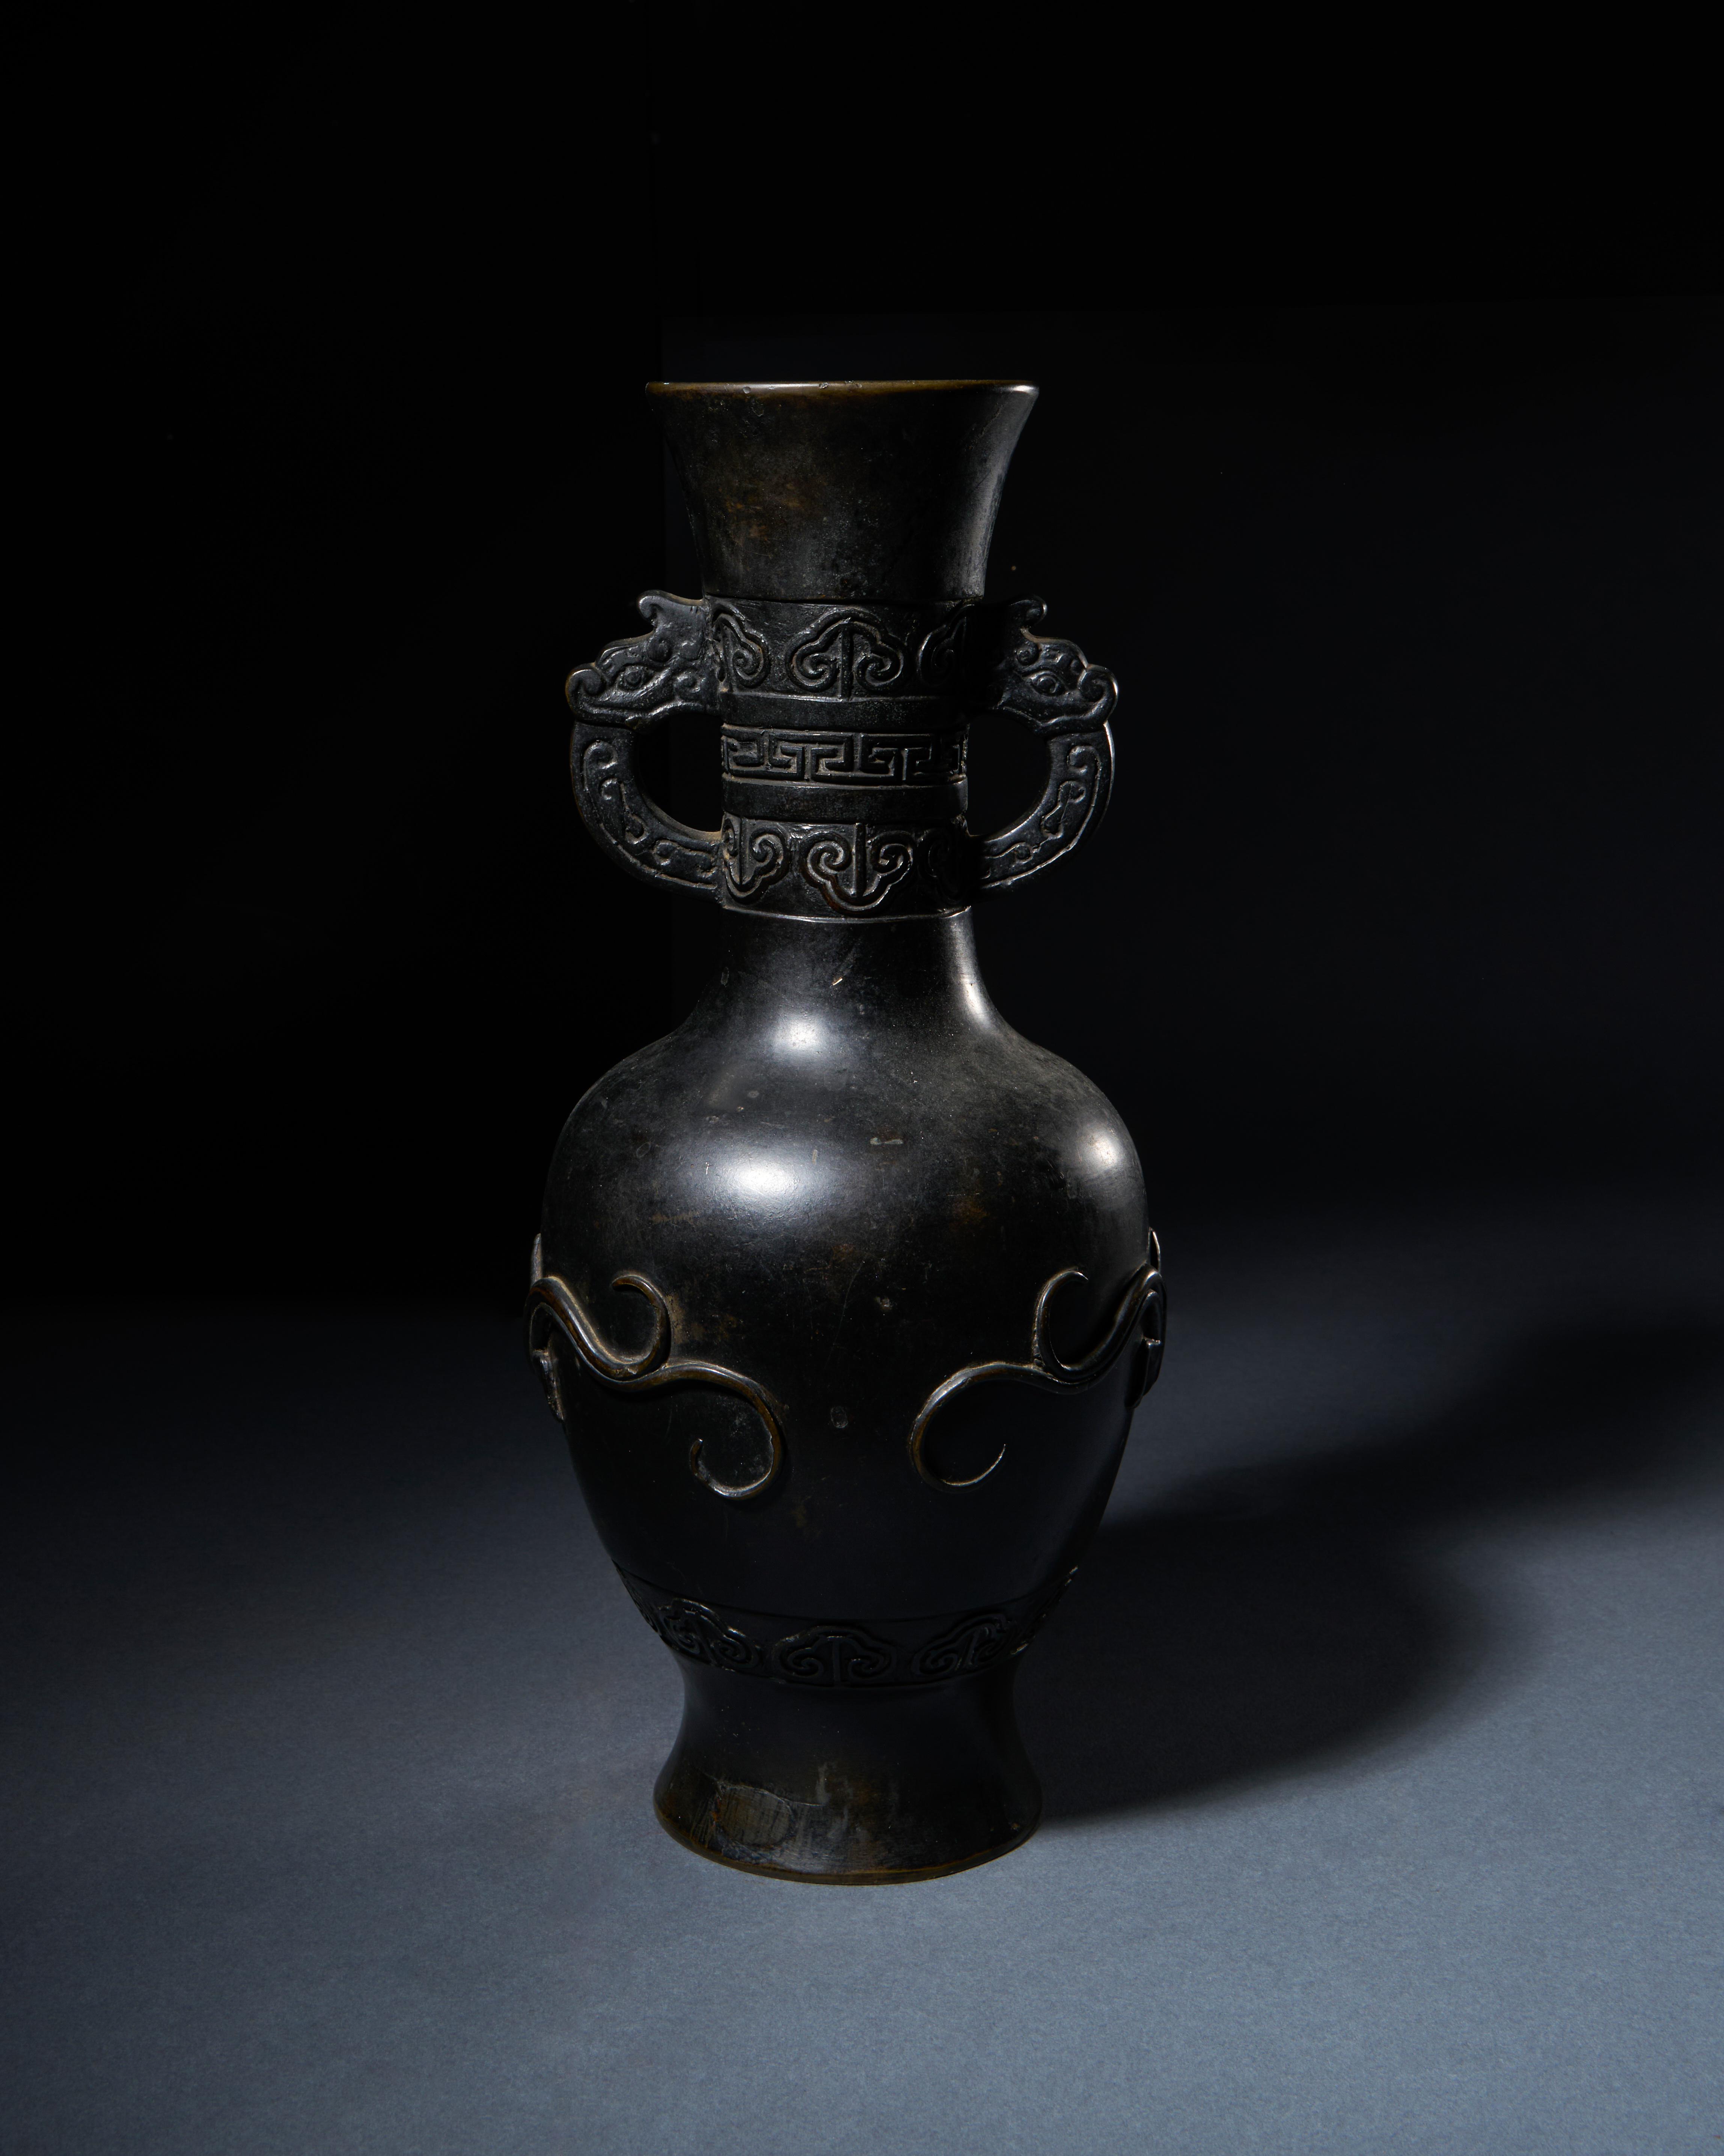 A CHINESE BRONZE "QILIN" VASE, MING DYNASTY (1368-1644)